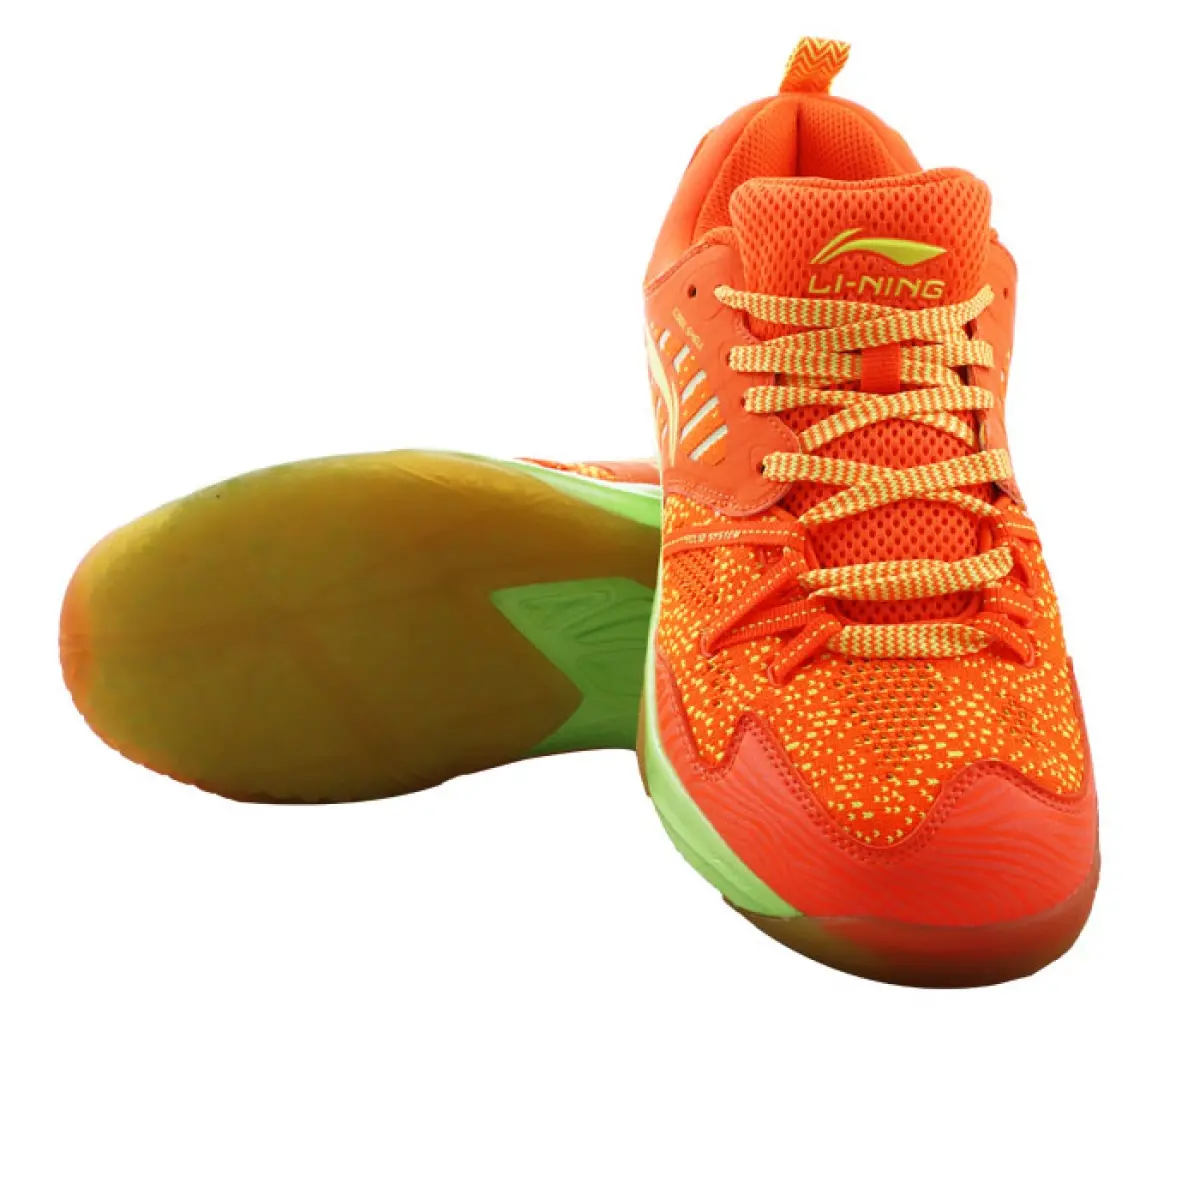 Buy Online LiNing Armor Non Marking Badminton Shoes Lowest Prices